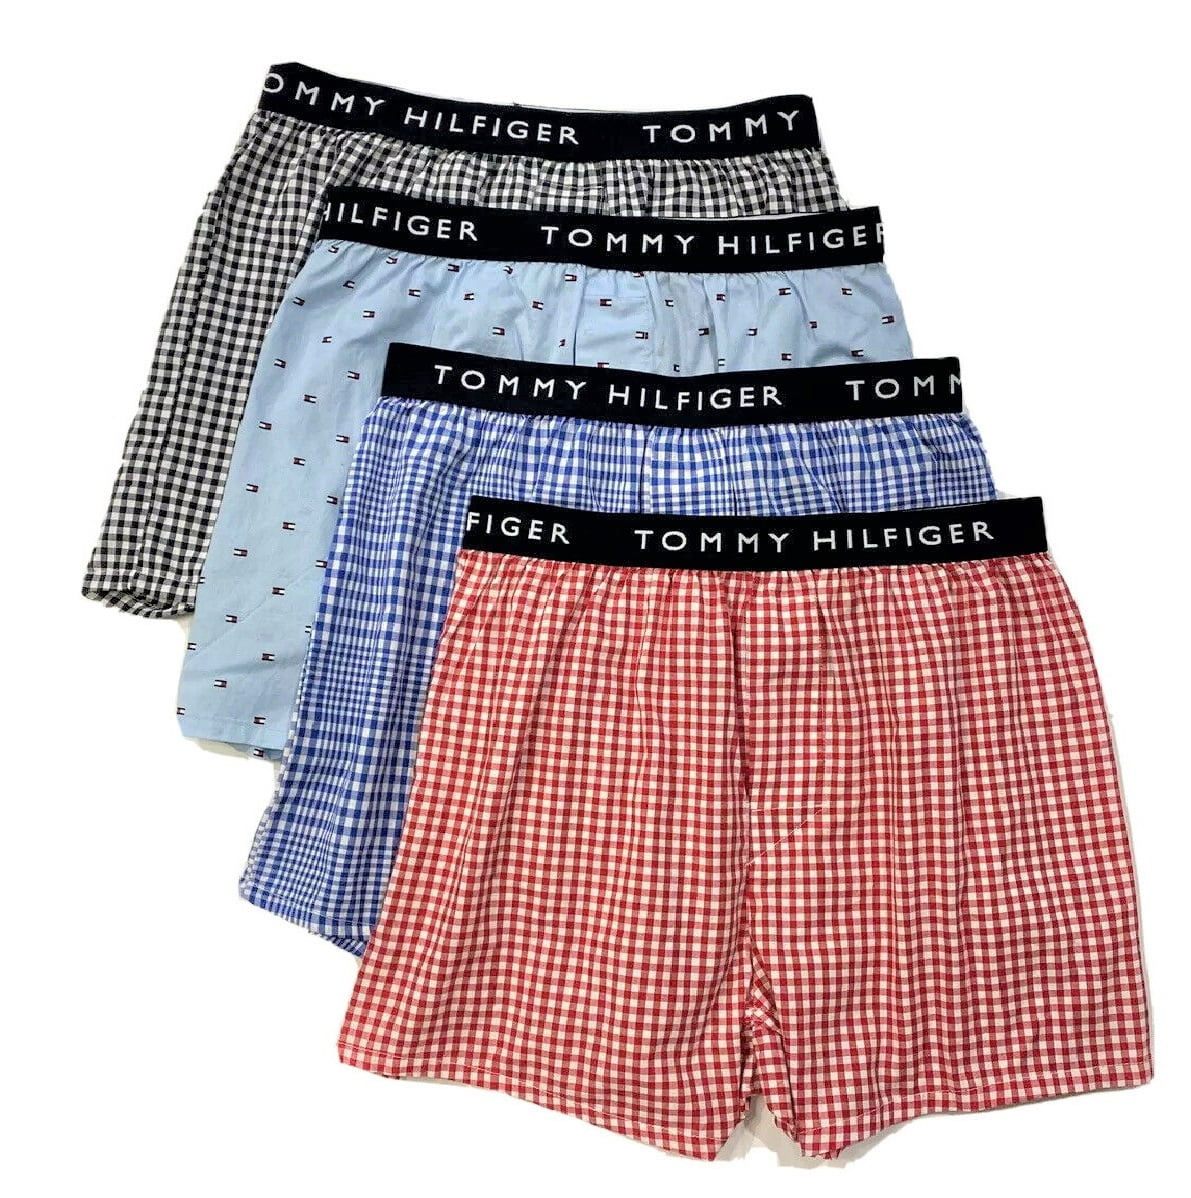 TOMMY HILFIGER MEN X4 - 20 CHECK XLARGE - 4 PACK SLIM FIT WOVEN